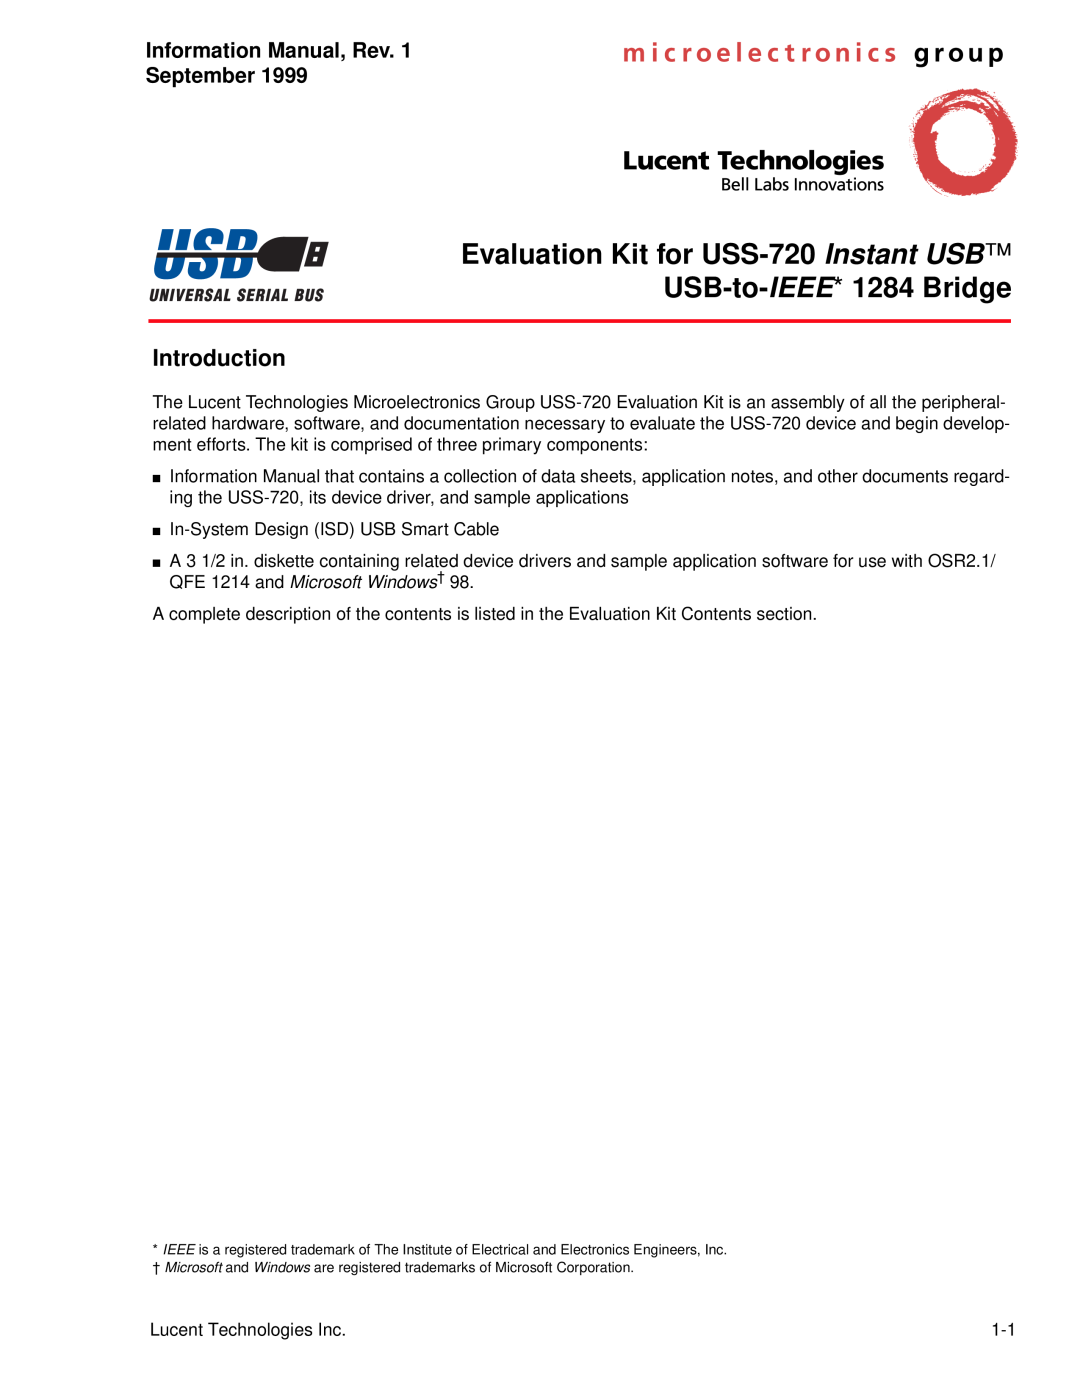 Lucent Technologies manual Evaluation Kit for USS-720 Instant USB USB-to-IEEE* 1284 Bridge, Introduction 